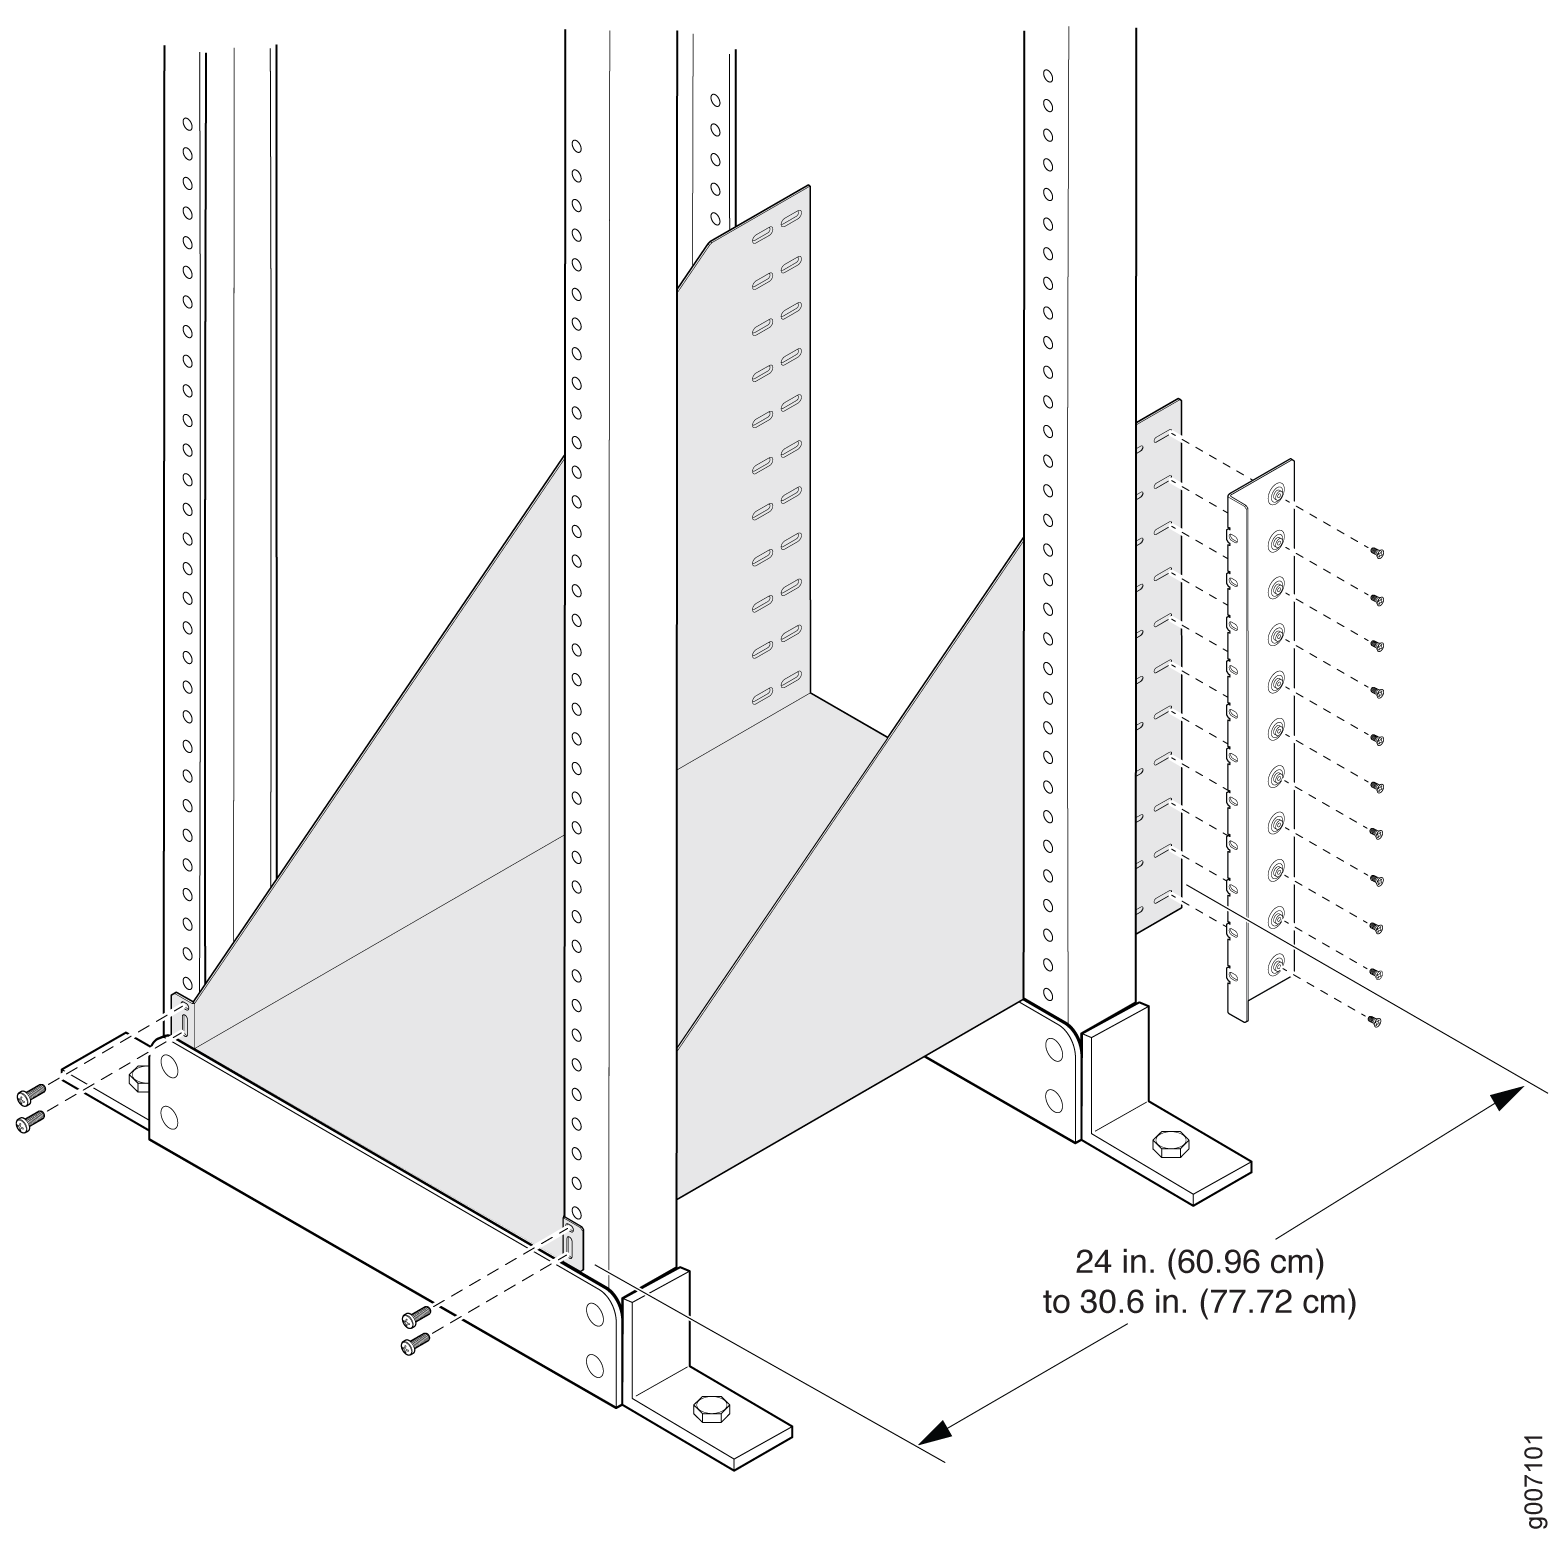 Installing the Mounting Hardware for a Four-Post Rack or Cabinet